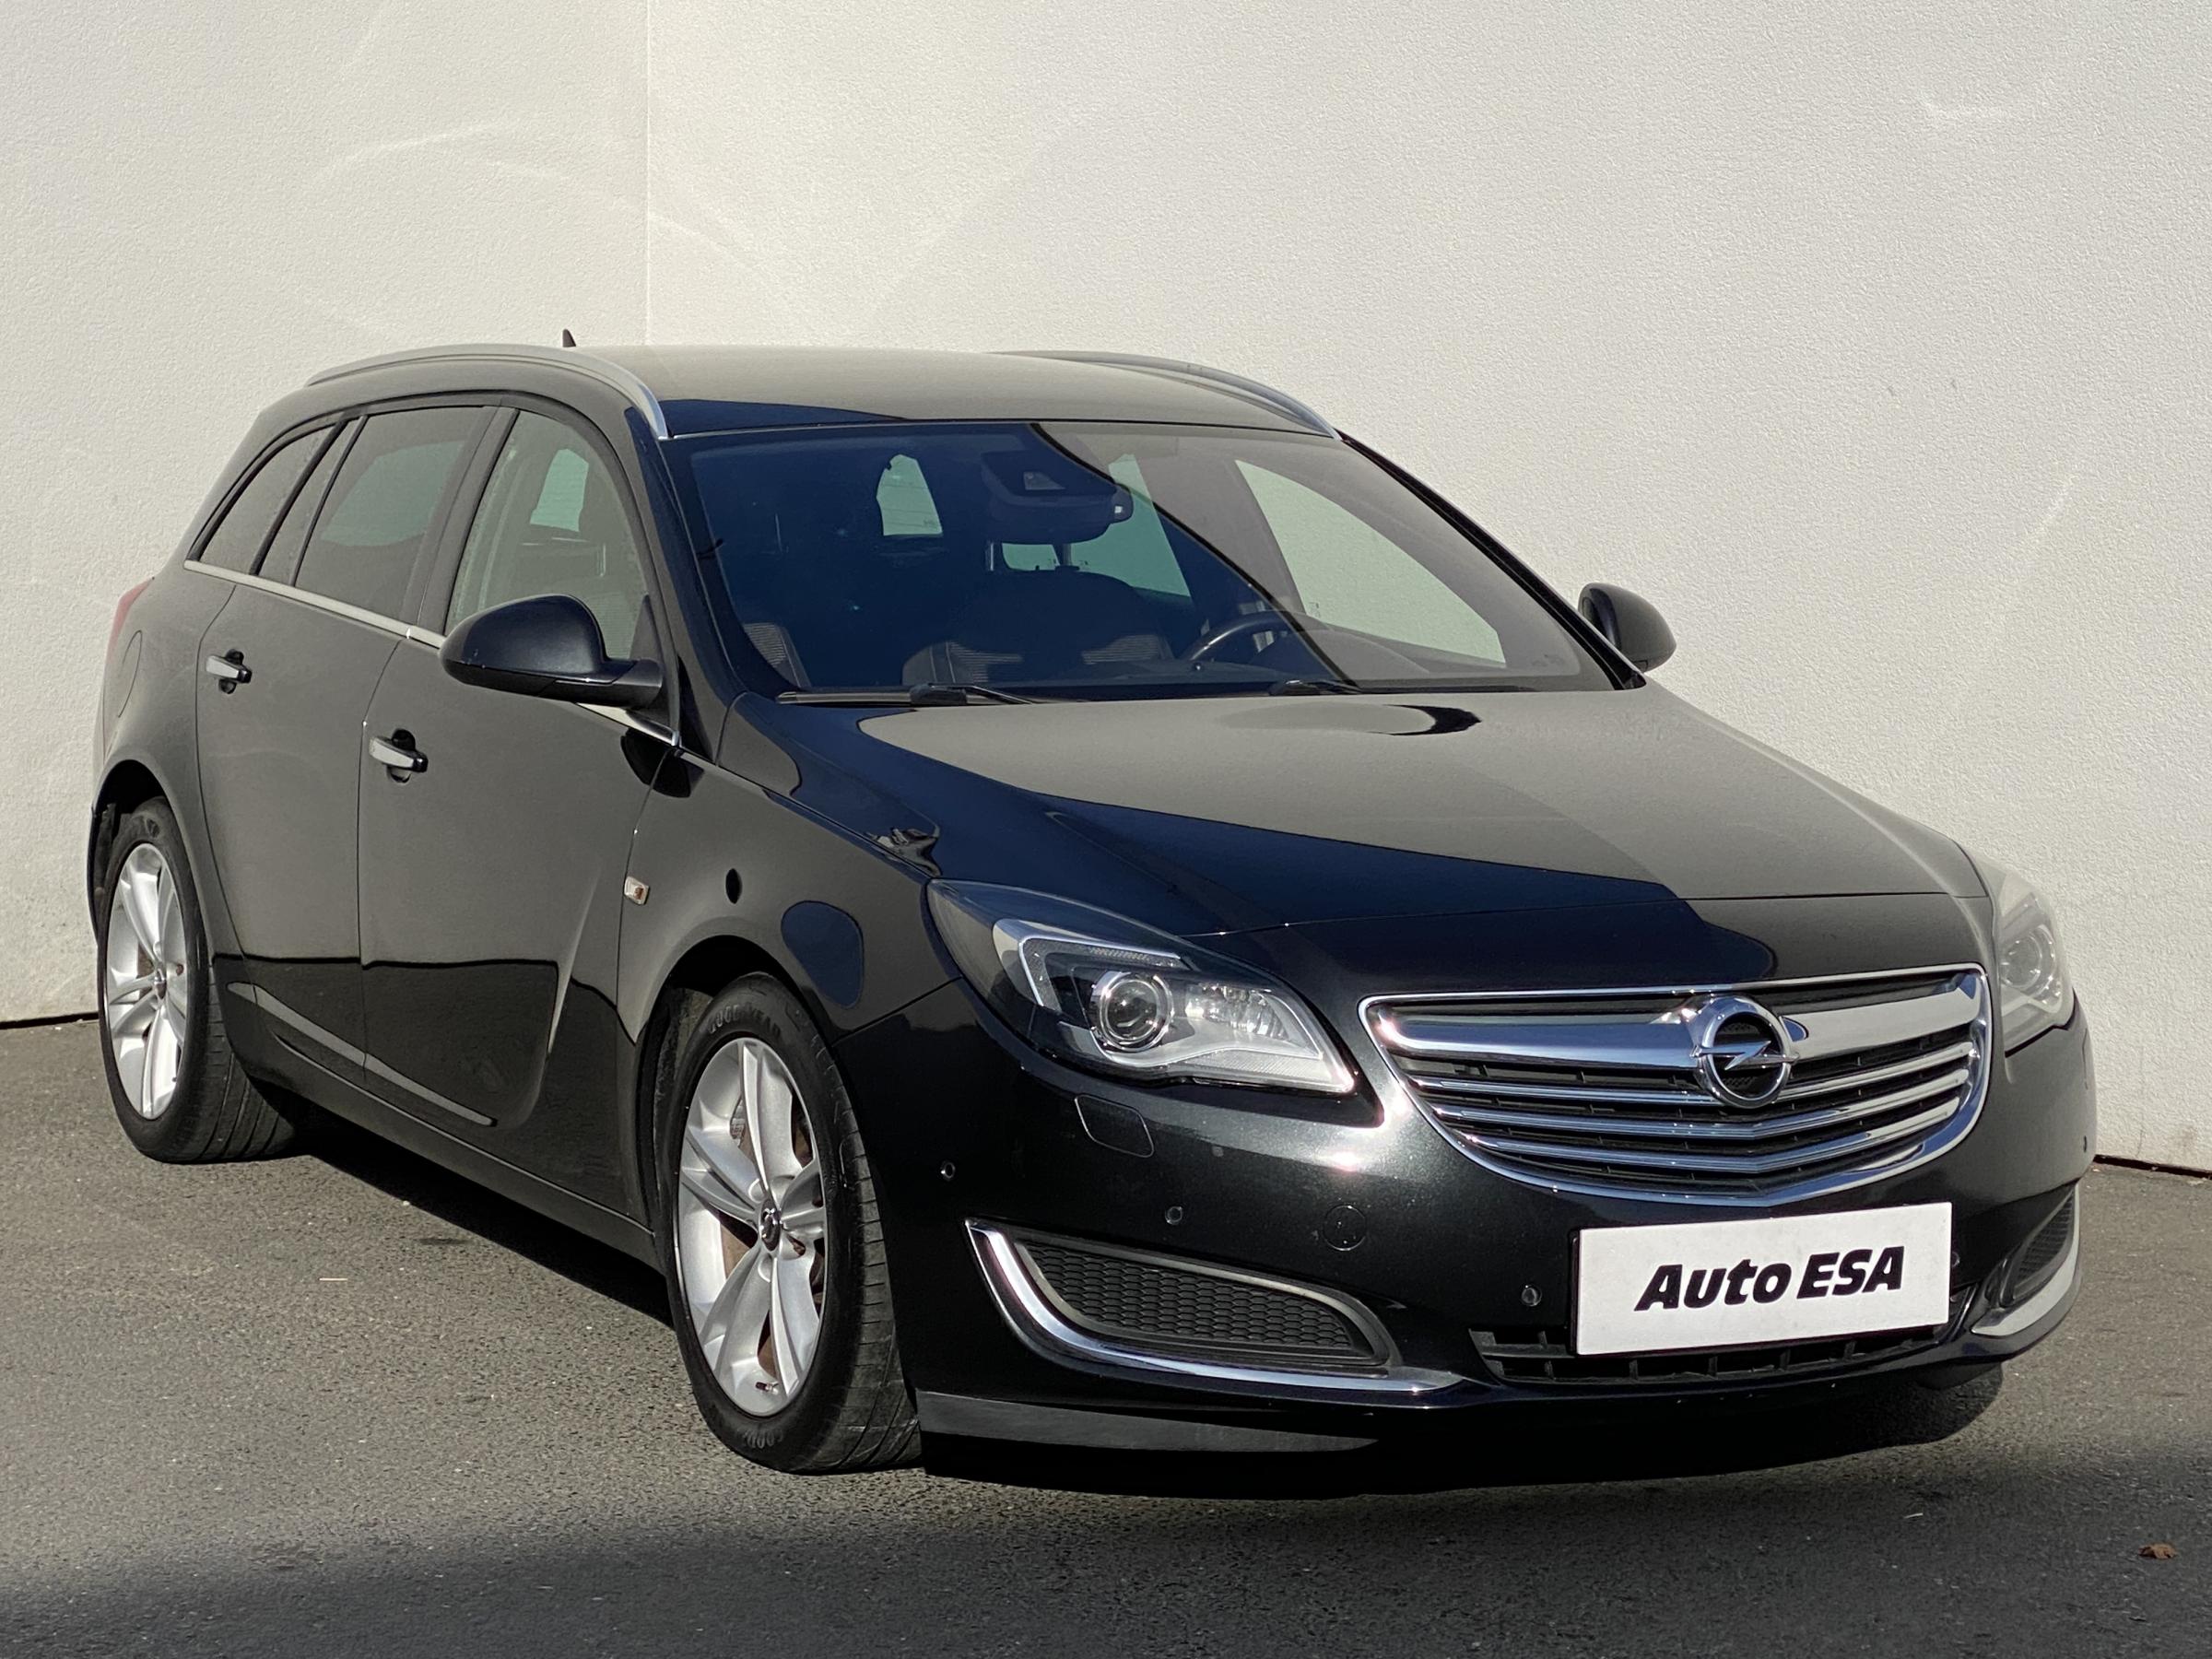 Opel Insignia Sports Tourer images (8 of 35)